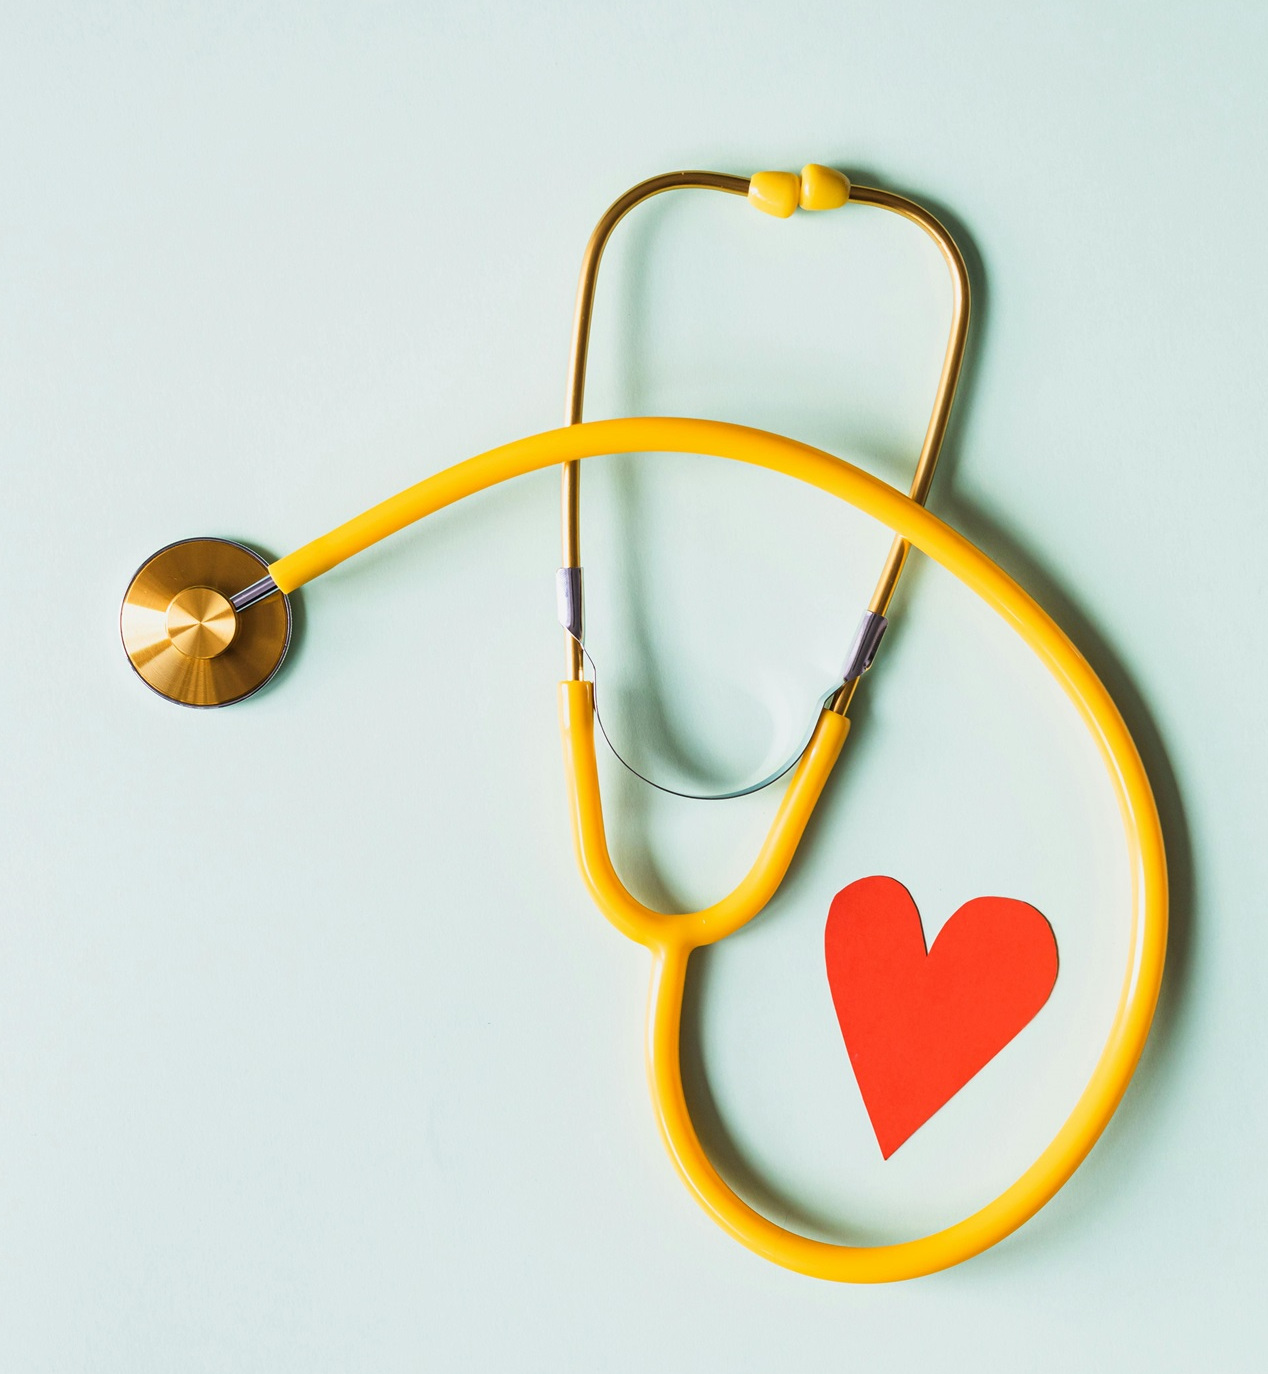 Yellow stethoscope with a red heart under it